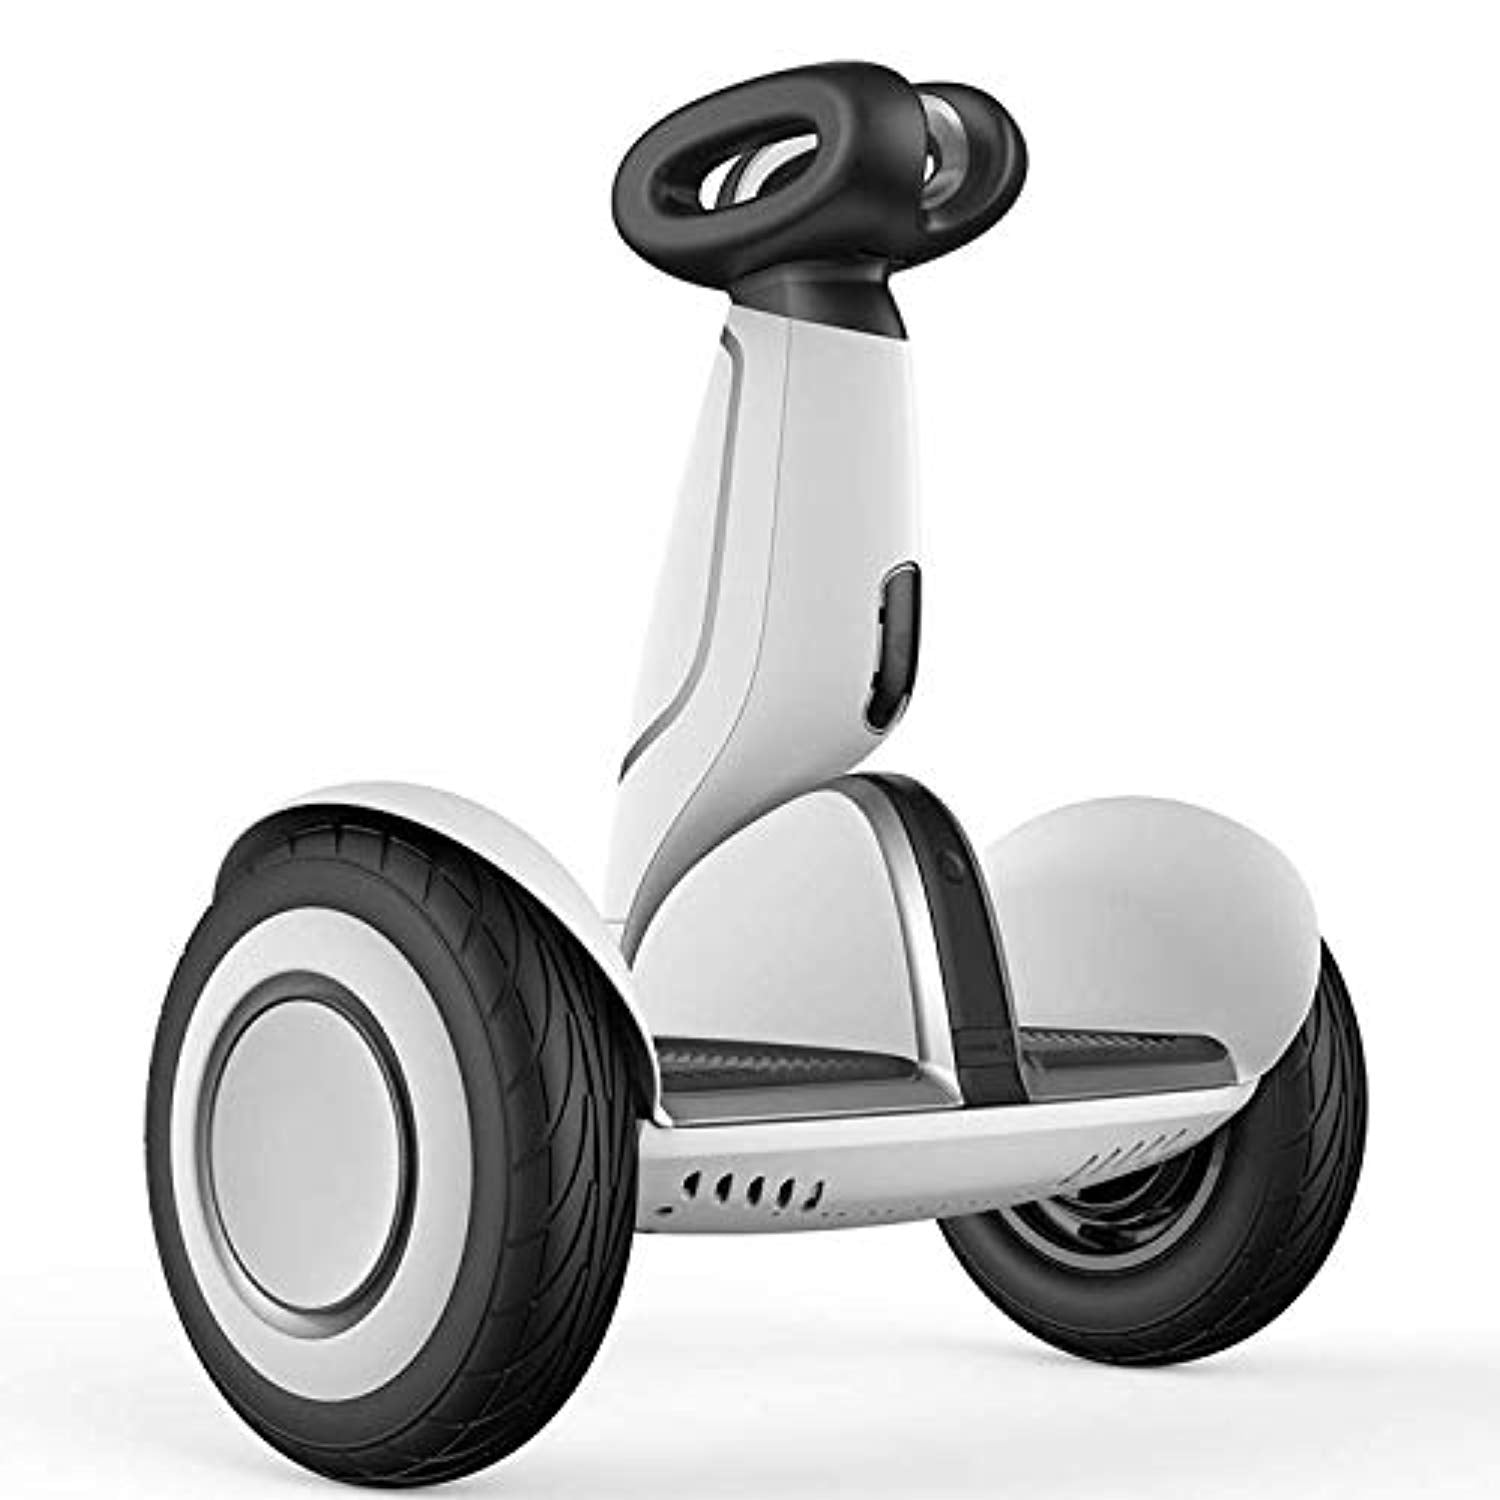 Smart Self-Balancing Electric Scooter with Intelligent Lighting and Battery System, Control and Auto-Following Mode | Eco Company